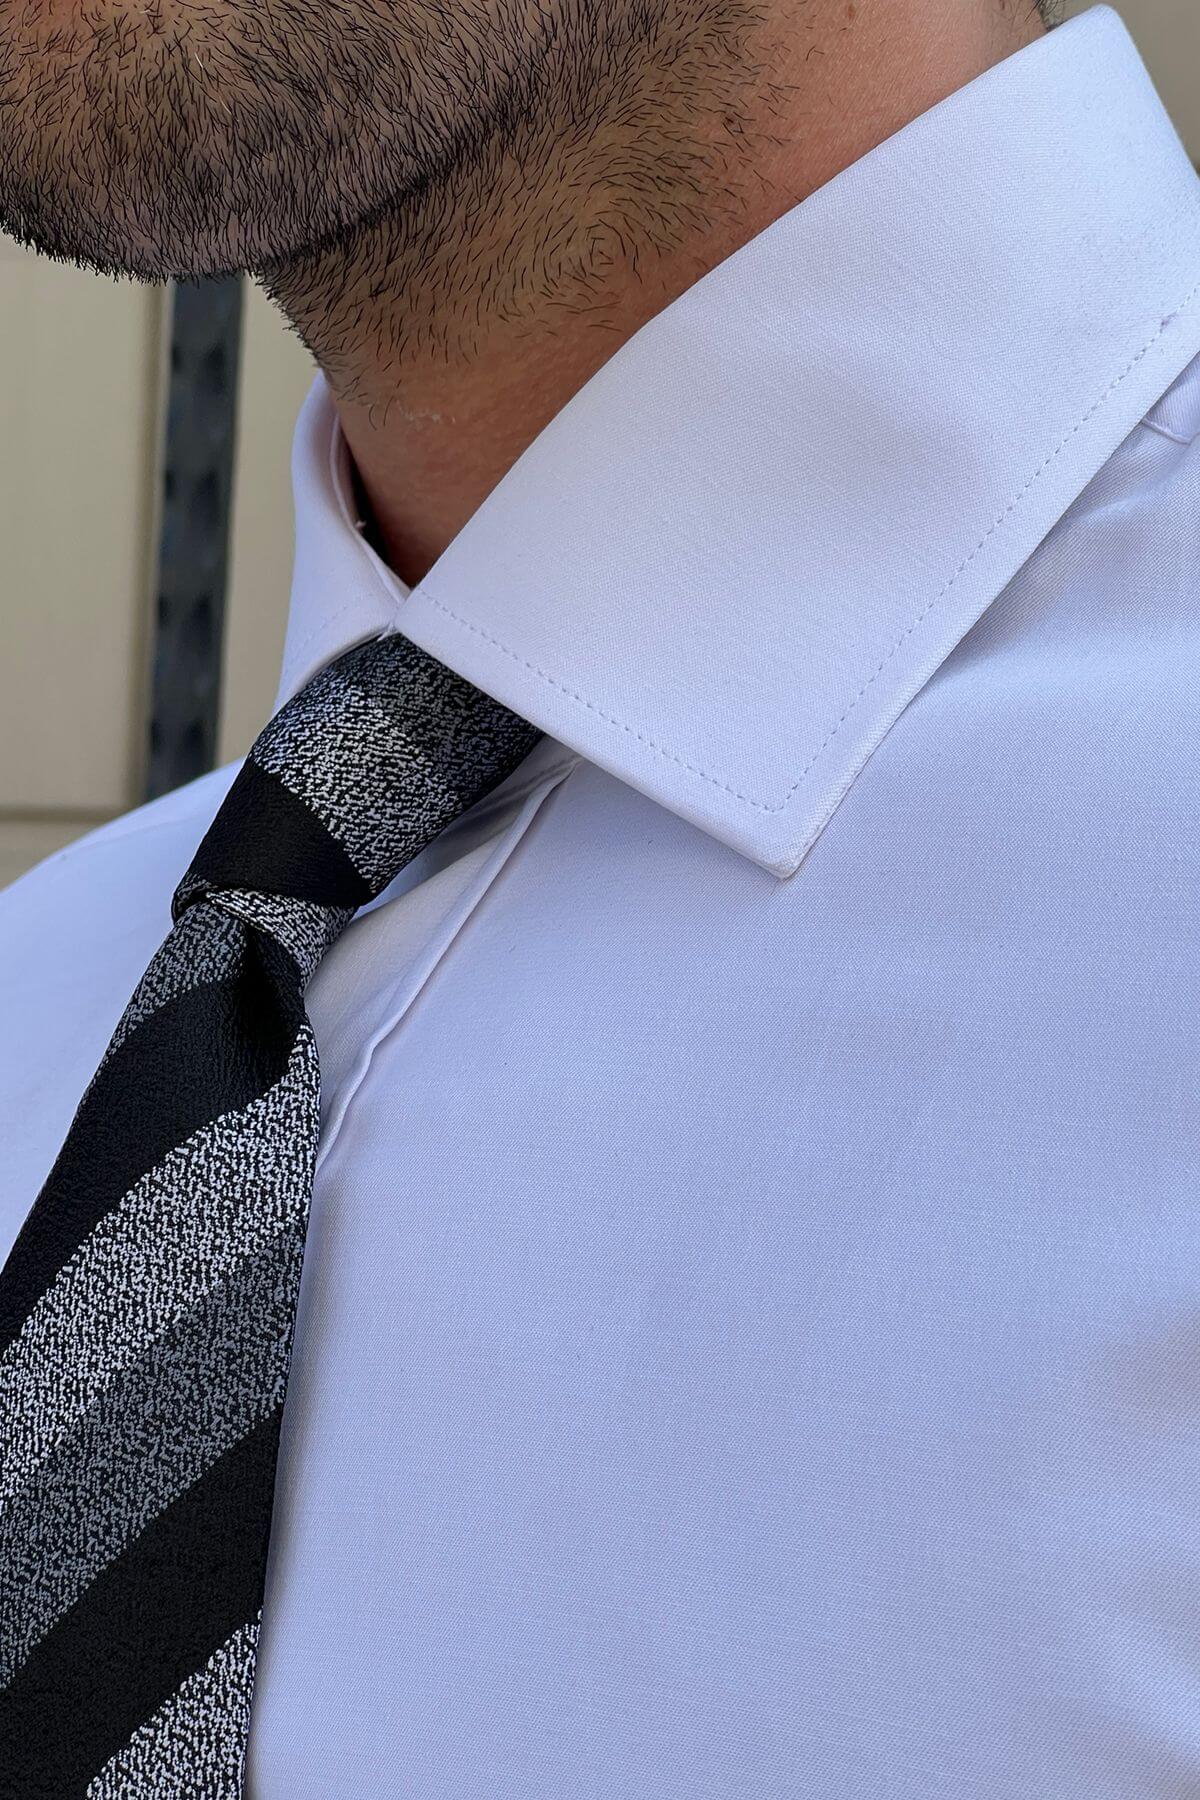 A Classic Collar White Cotton Shirt on display